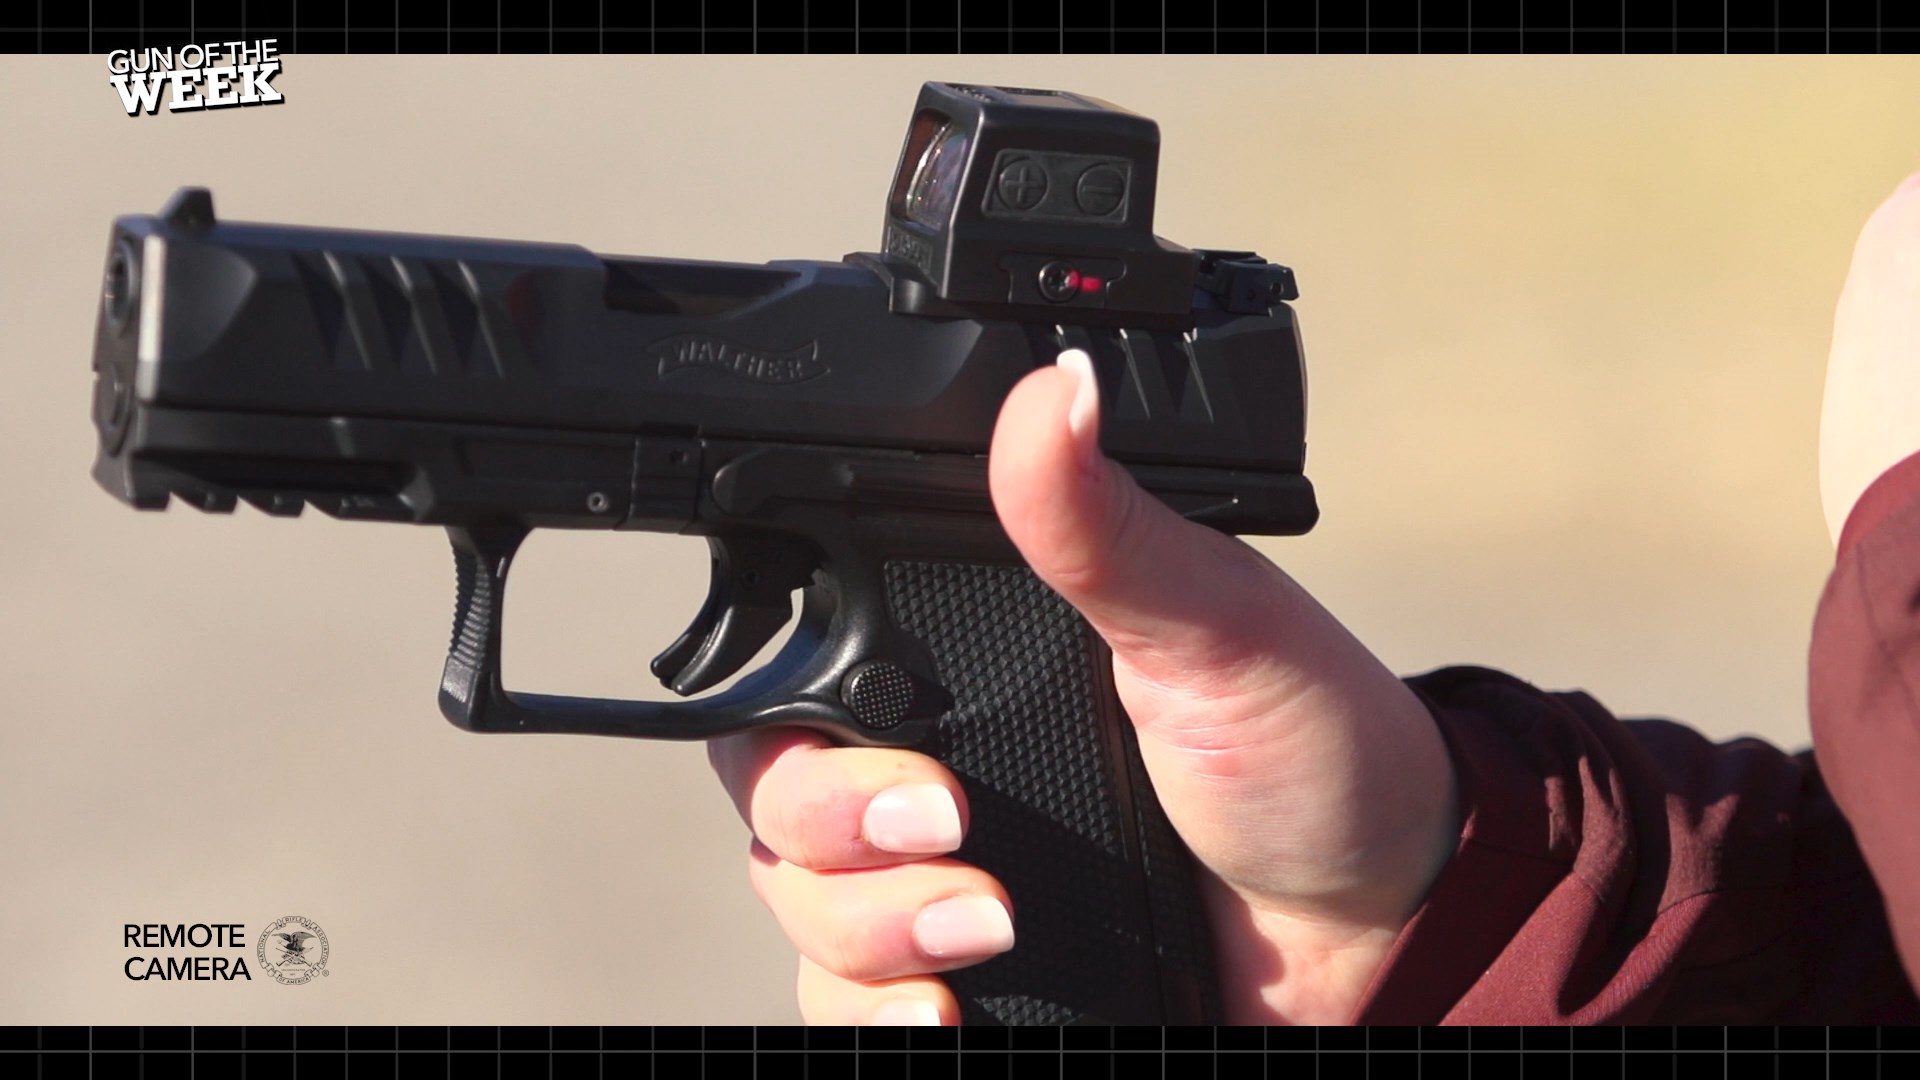 walther arms pdp f-series handgun in woman's hand outdoor black gun pistol remote camera